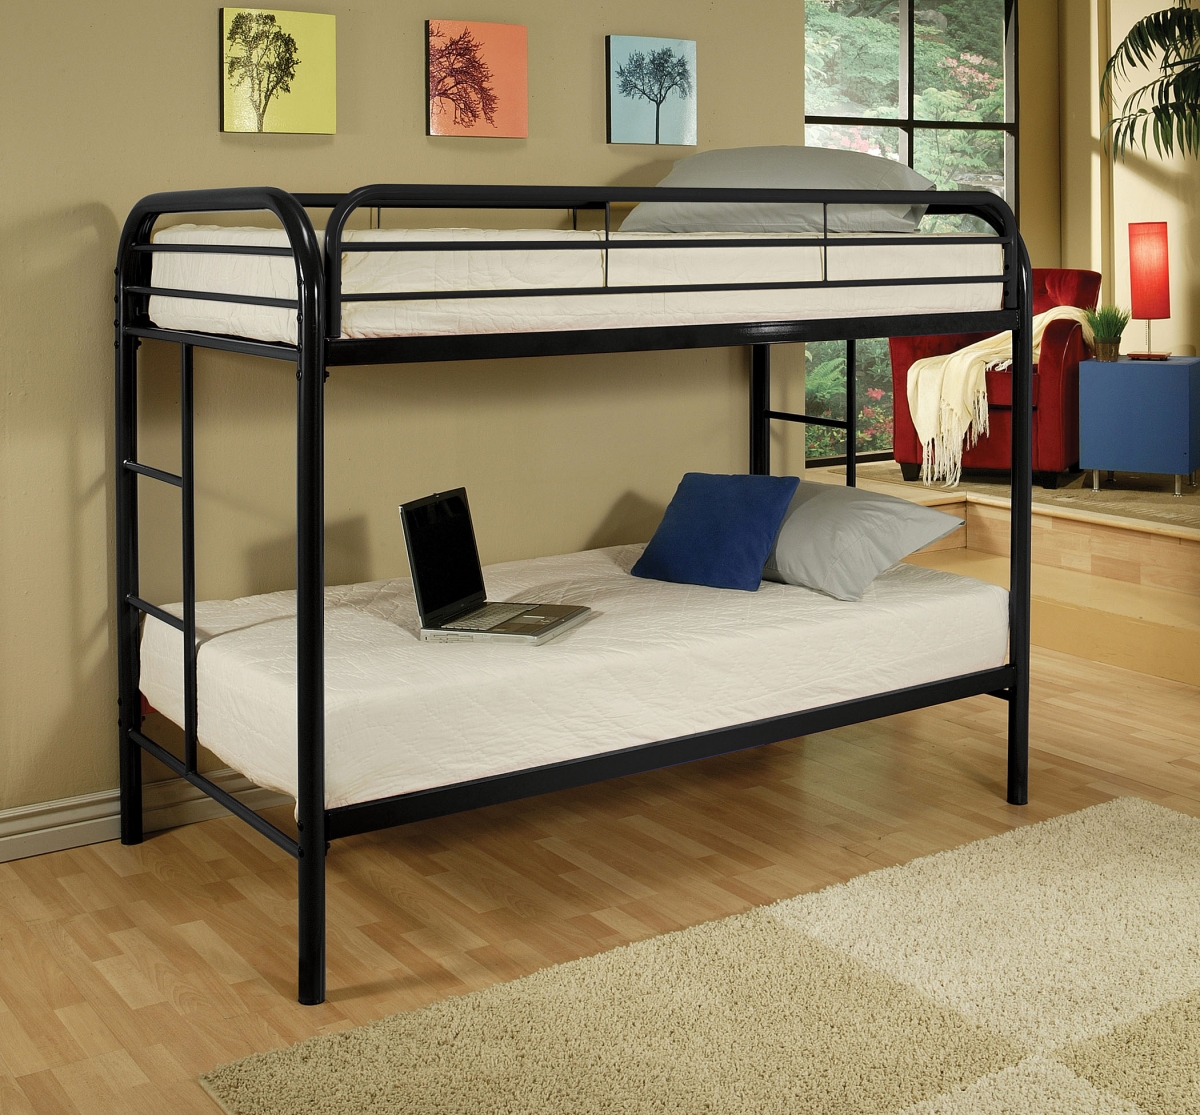 Home Roots Furniture 285197 60 X 78 X 41 In. Metal Tube Twin Bunk Bed - Black